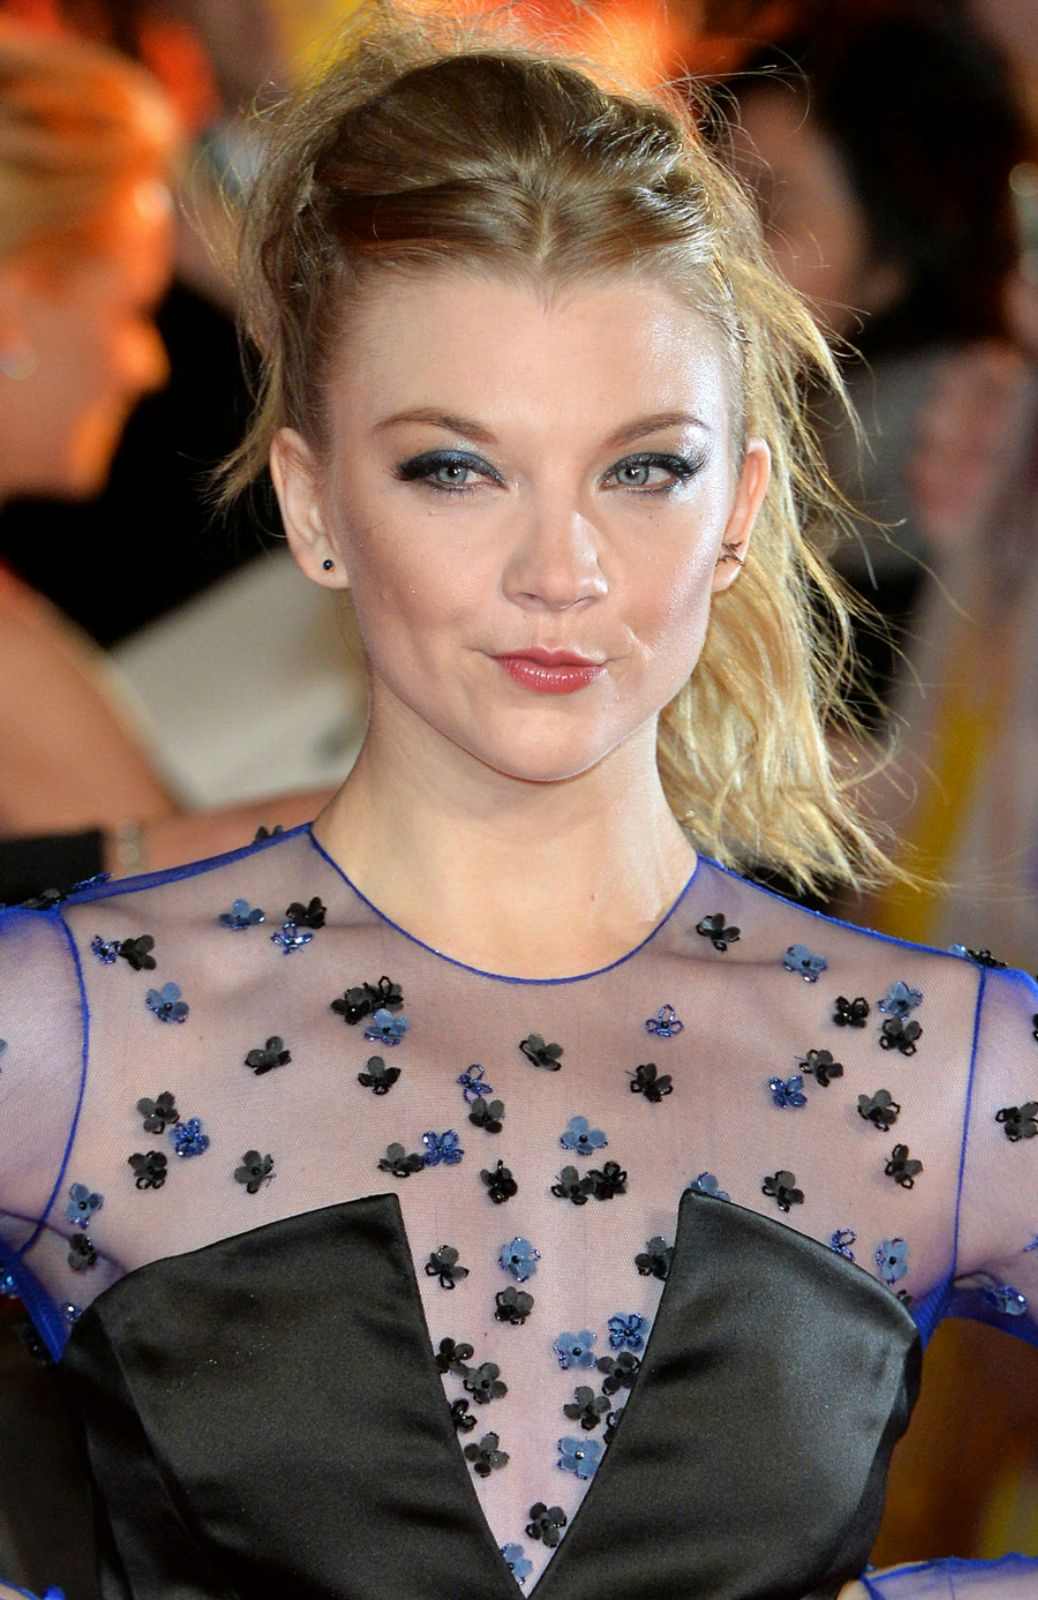 Im looking for someone that can rp as Natalie Dormer